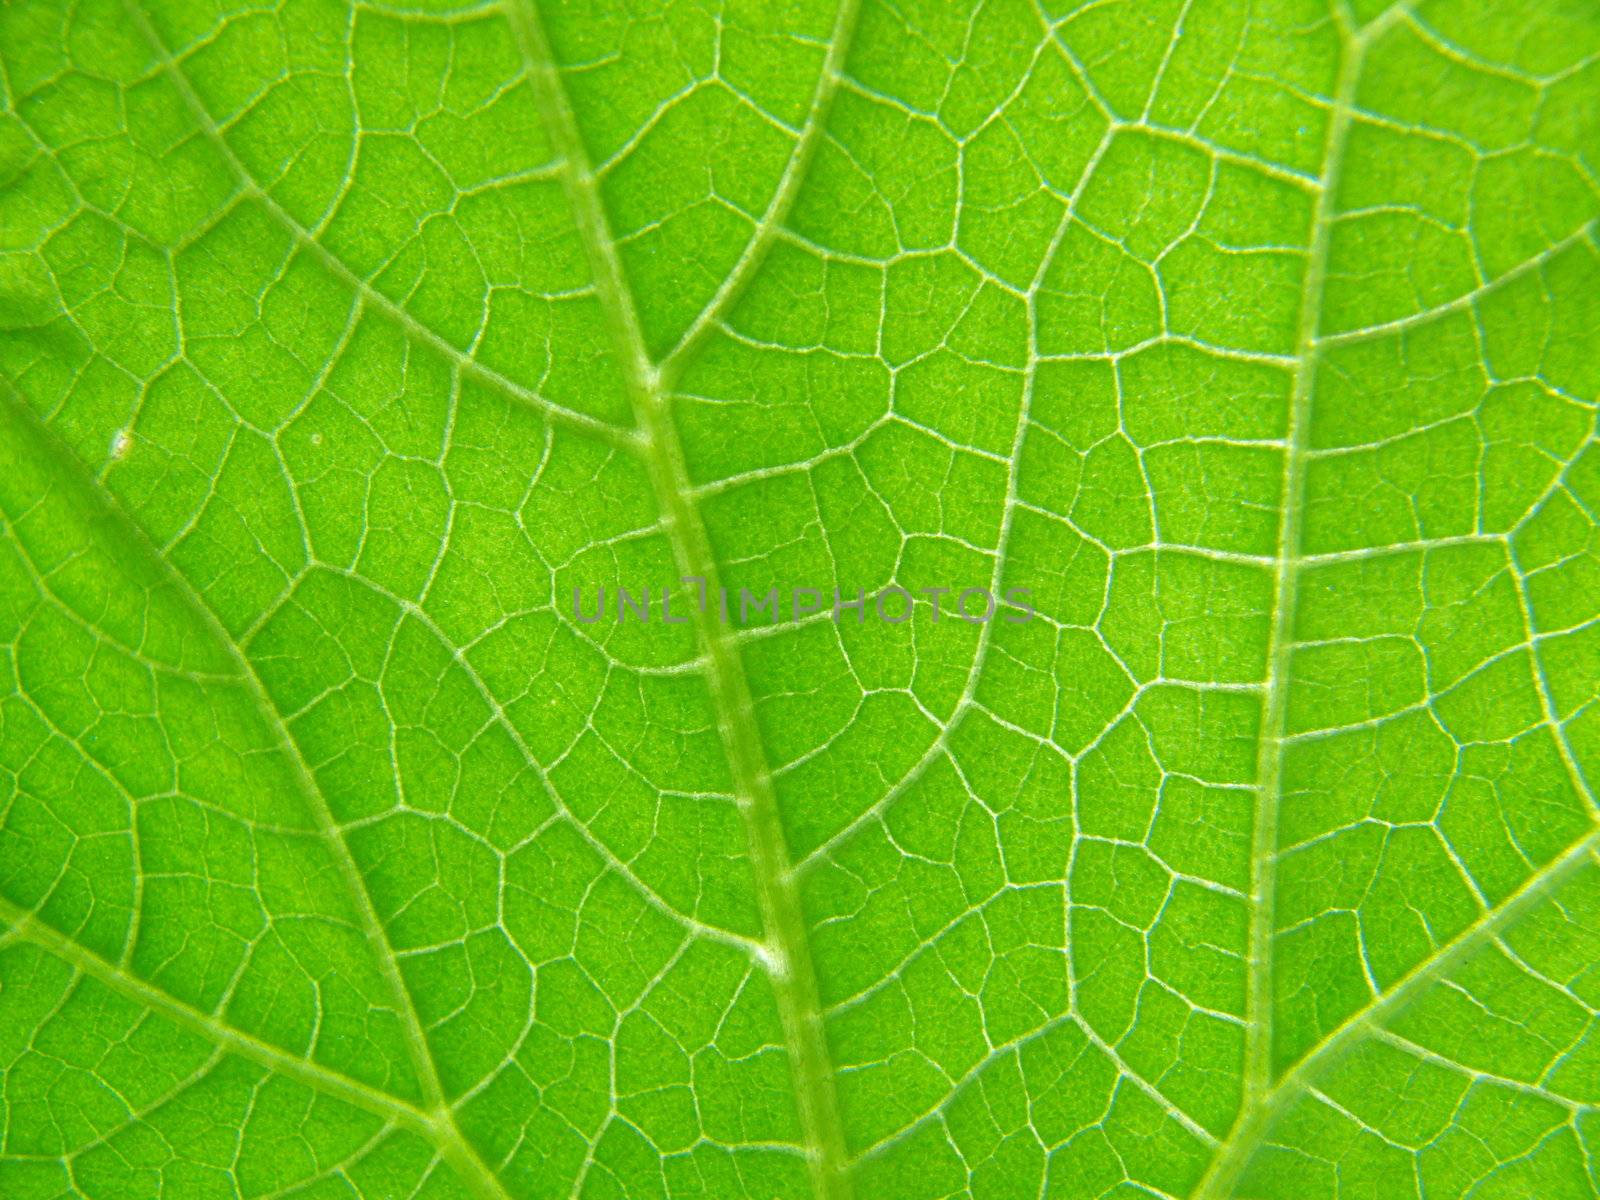 Texture of cucumber leaf by Stoyanov